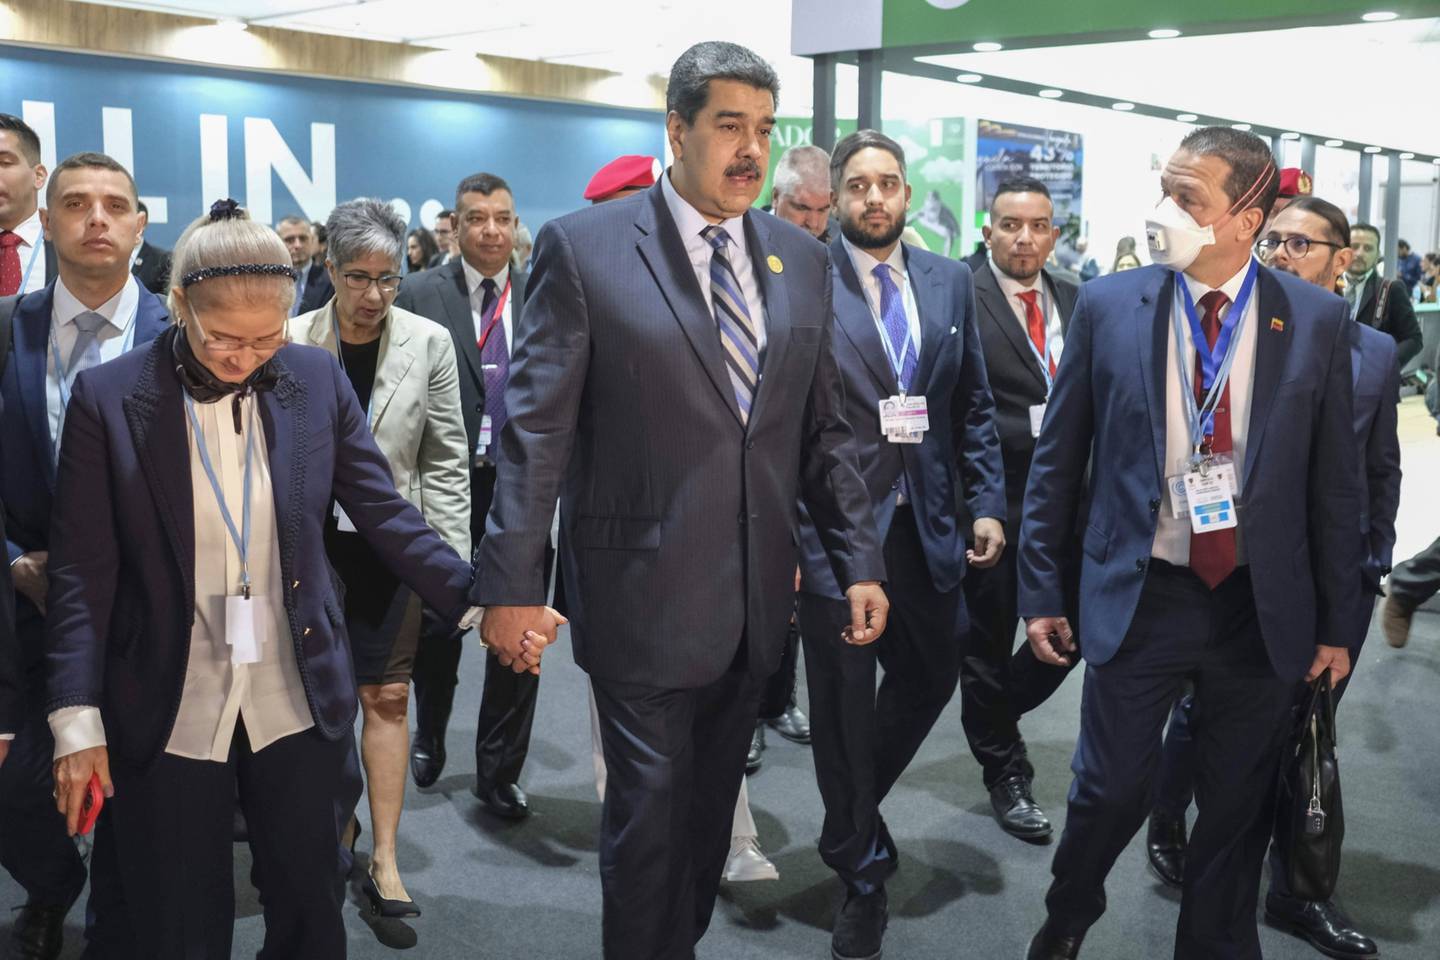 Nicolas Maduro, Venezuela's president, center, at the COP27 climate conference at the Sharm El Sheikh International Convention Centre in Sharm El-Sheikh, Egypt.